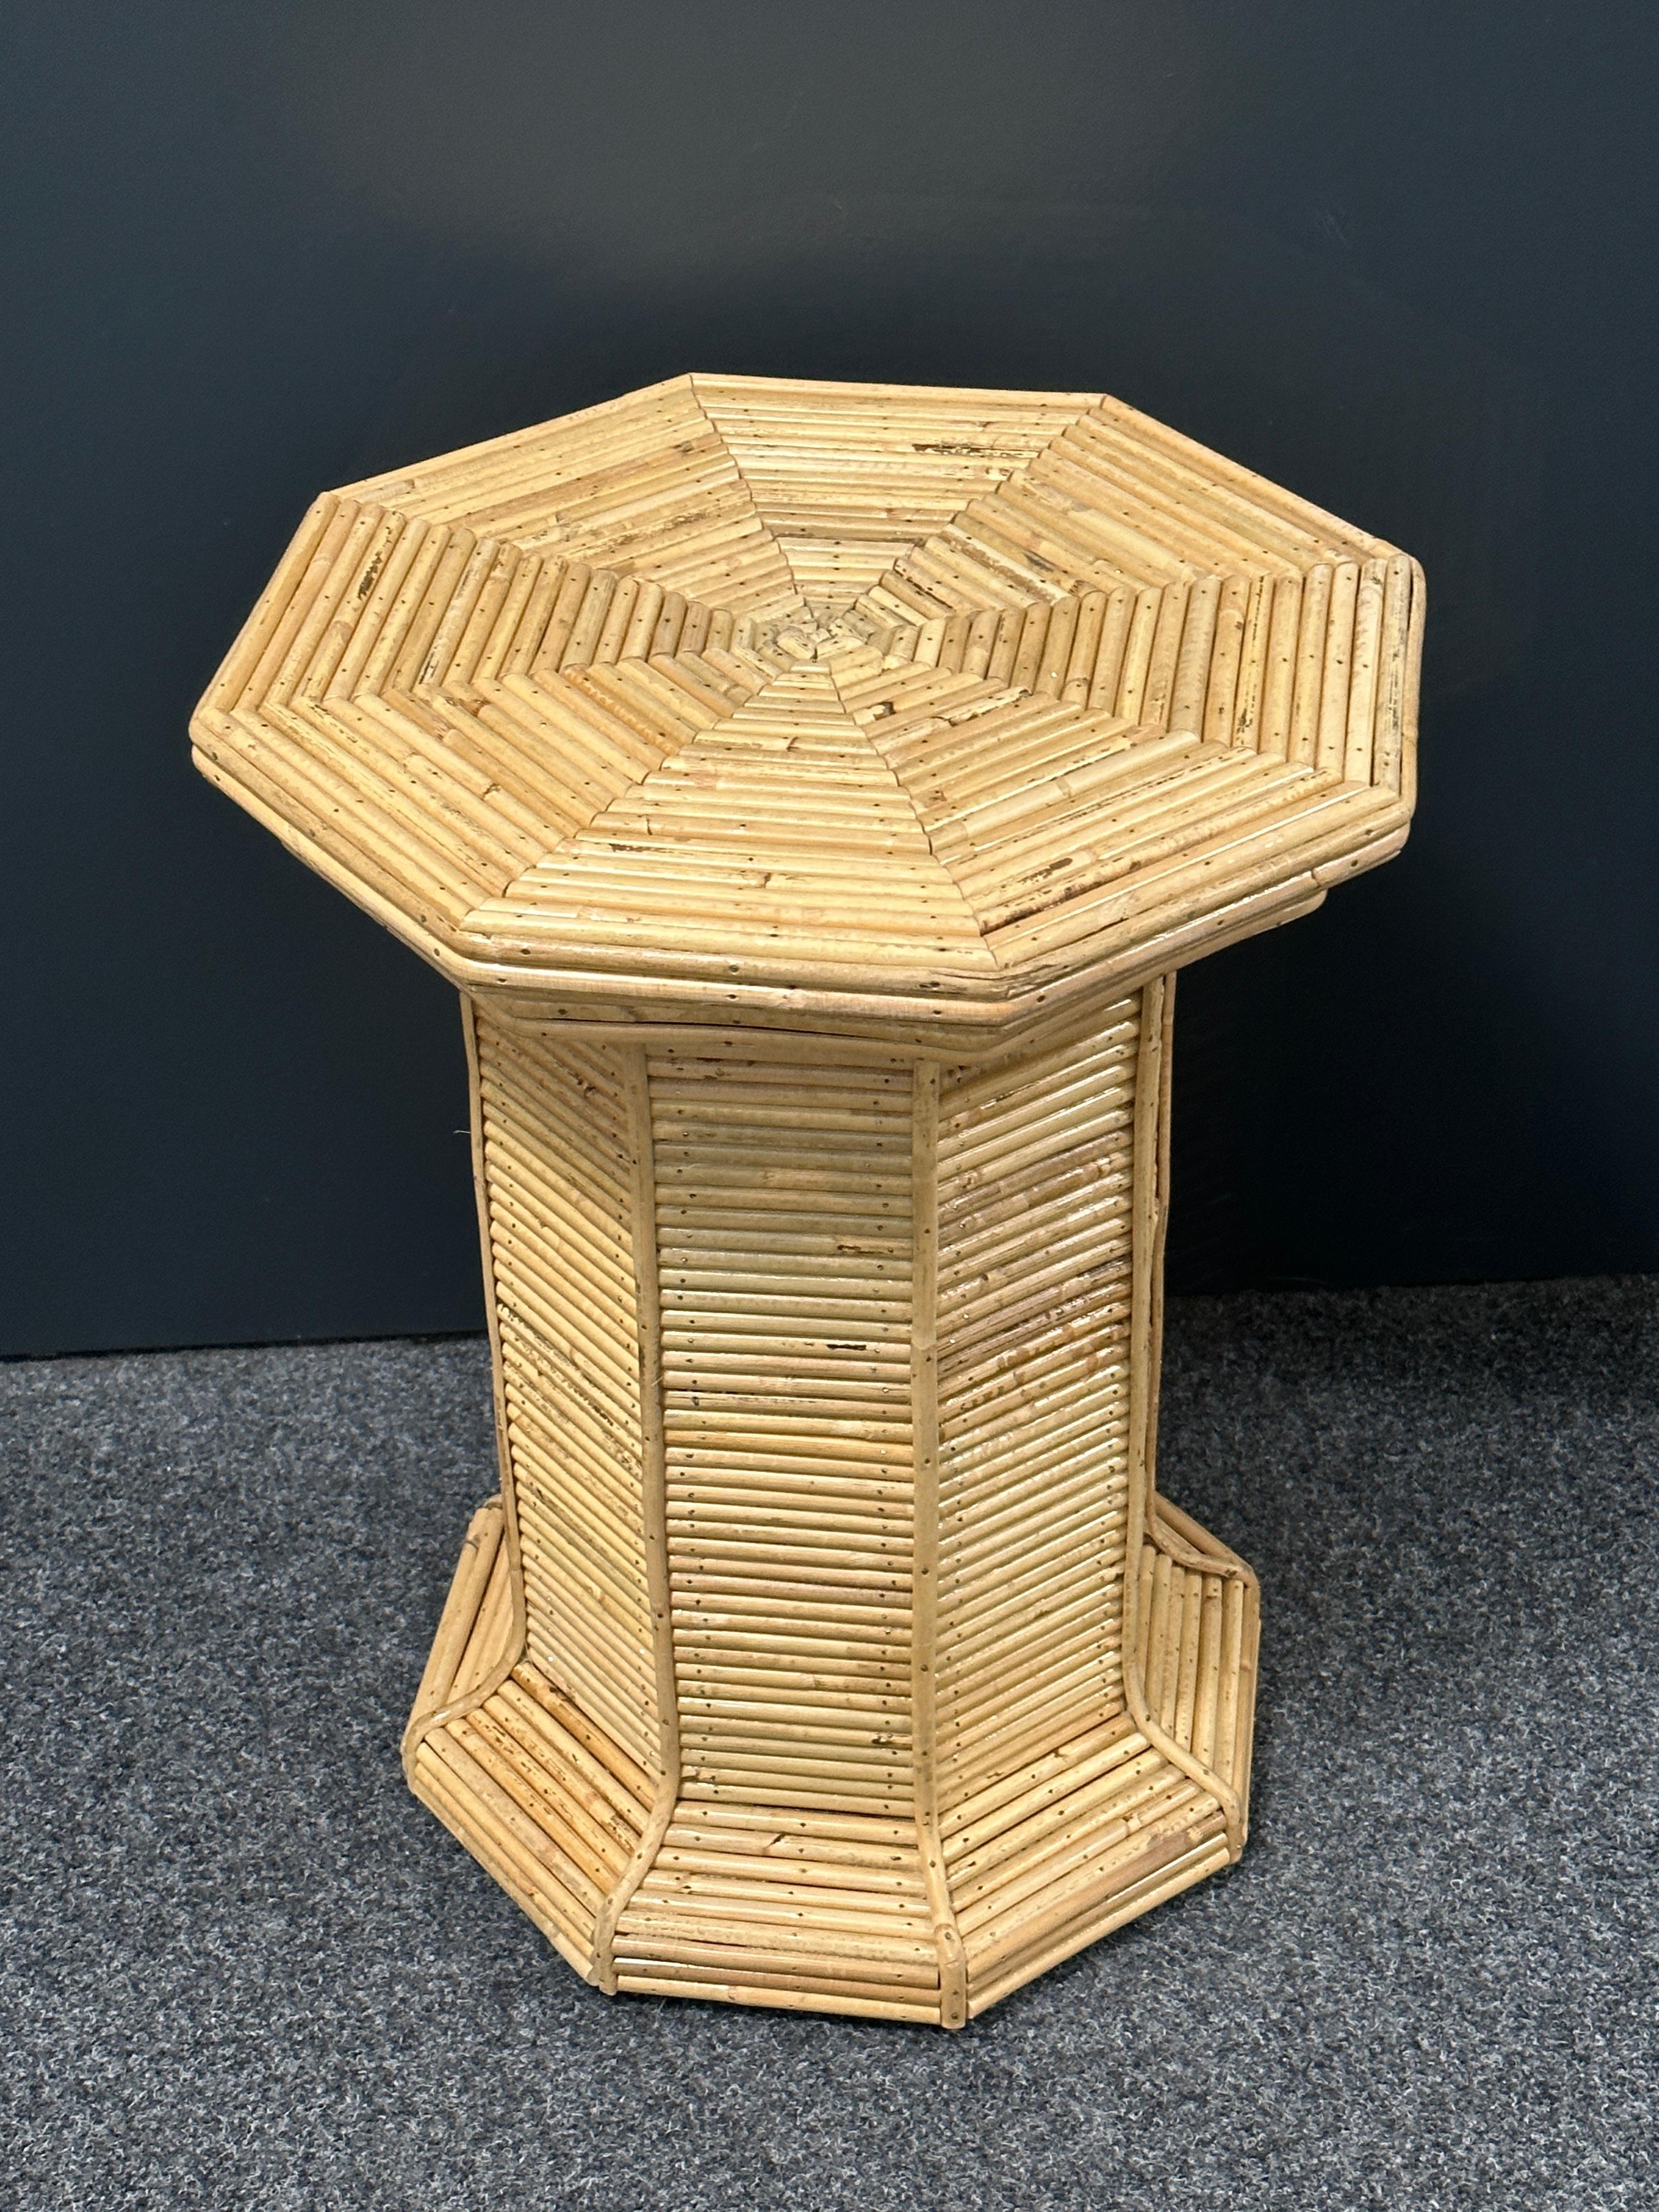 Hand-Crafted Vivai del Sud Bamboo Handcrafted Stylish Mid-Century Modern Rattan Pedestal  For Sale